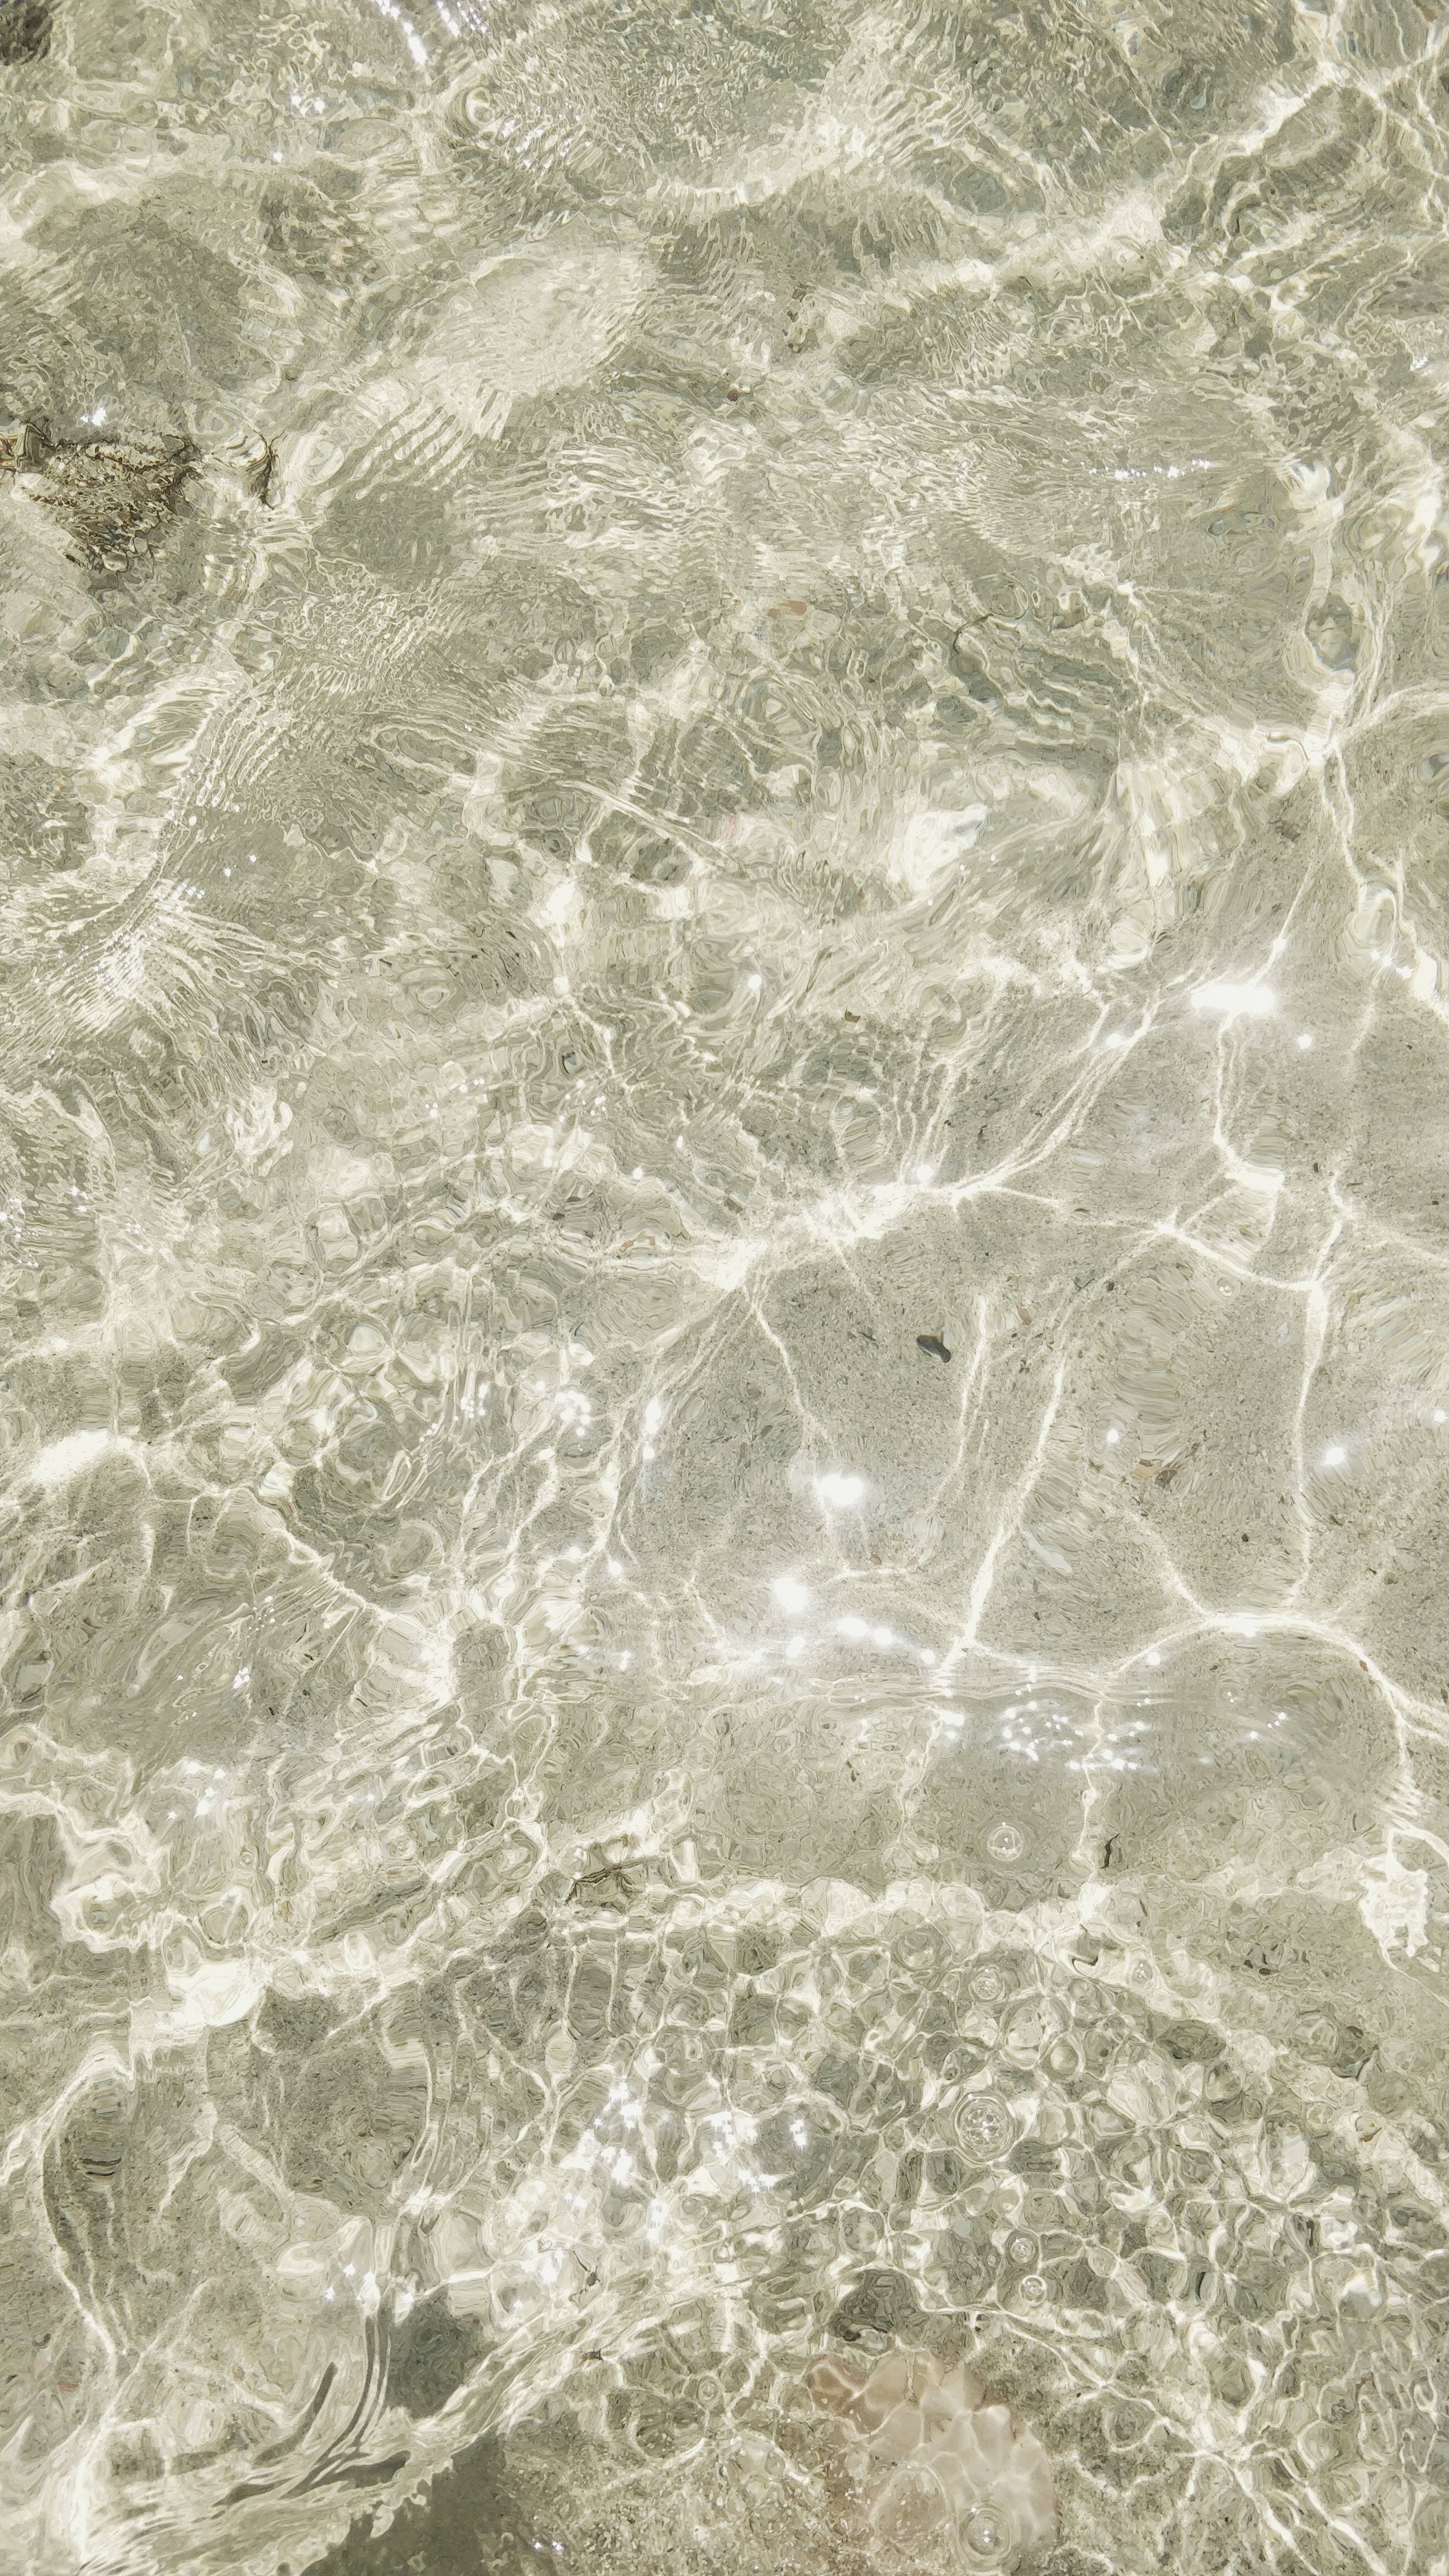 Clear Water Texture Marble 4K Wallpaper